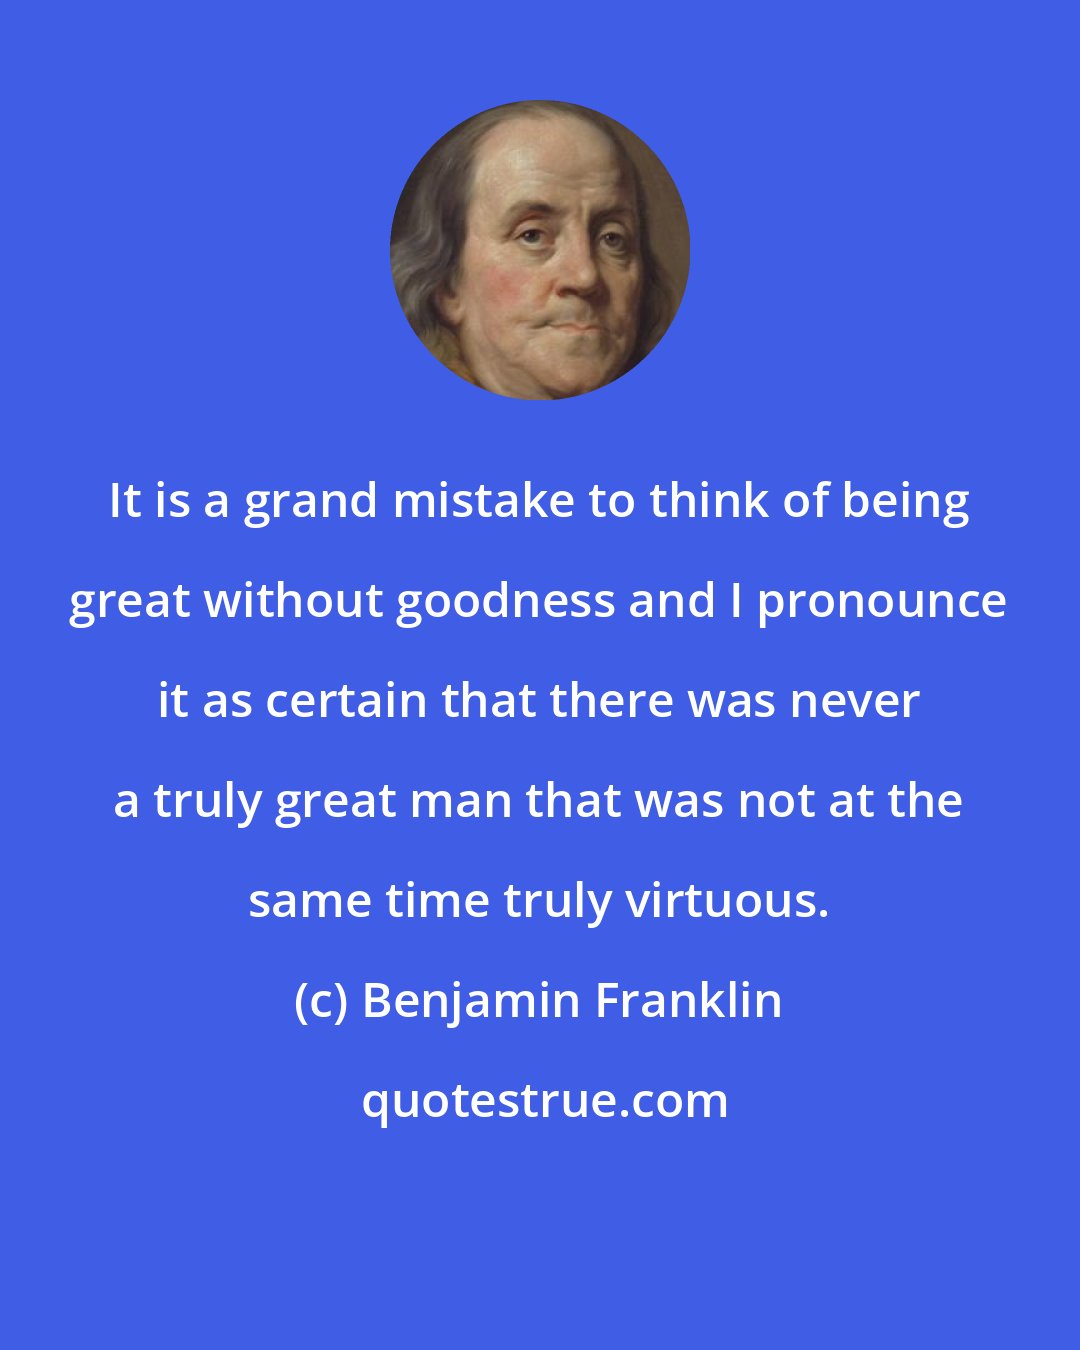 Benjamin Franklin: It is a grand mistake to think of being great without goodness and I pronounce it as certain that there was never a truly great man that was not at the same time truly virtuous.